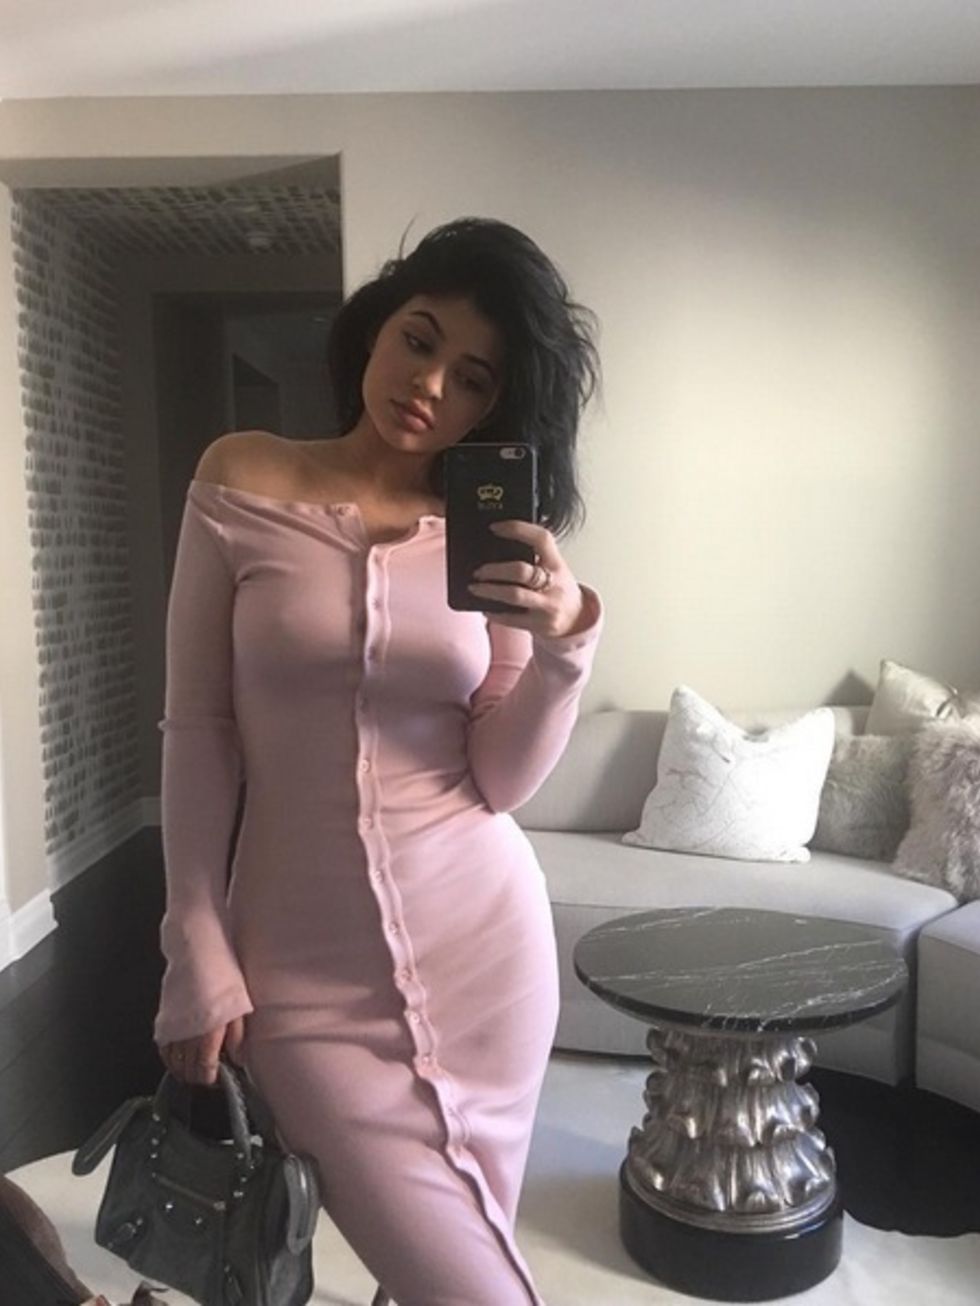 ...And after receiving criticism for the photographs, a casually dressed Kylie posted a selfie saying: "People gonna judge no matter what you wear no matter what you say no matter what you do no matter how you look. Welcome in our society."